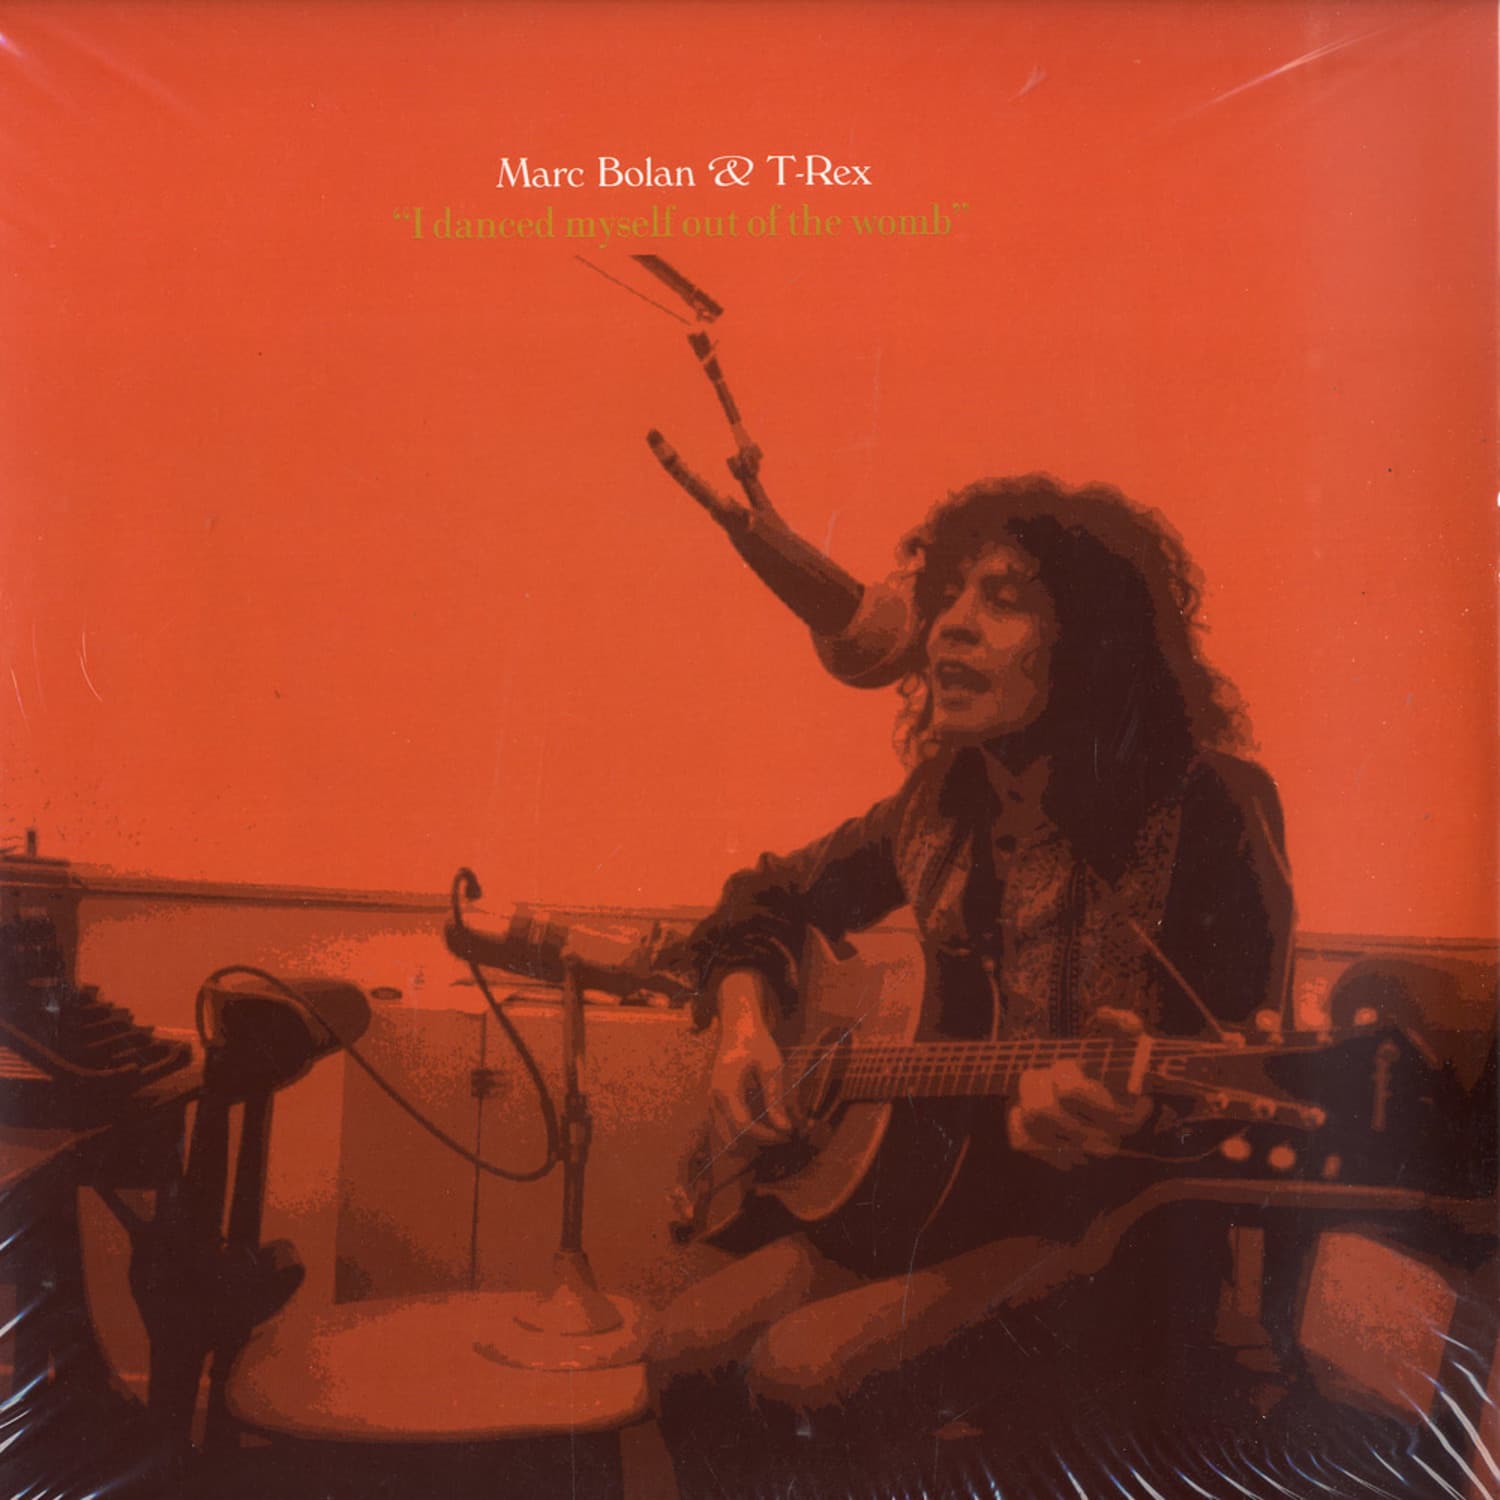 Marc Bolan & T-Rex - I DANCED MYSELF OUT OF THE WOMB 